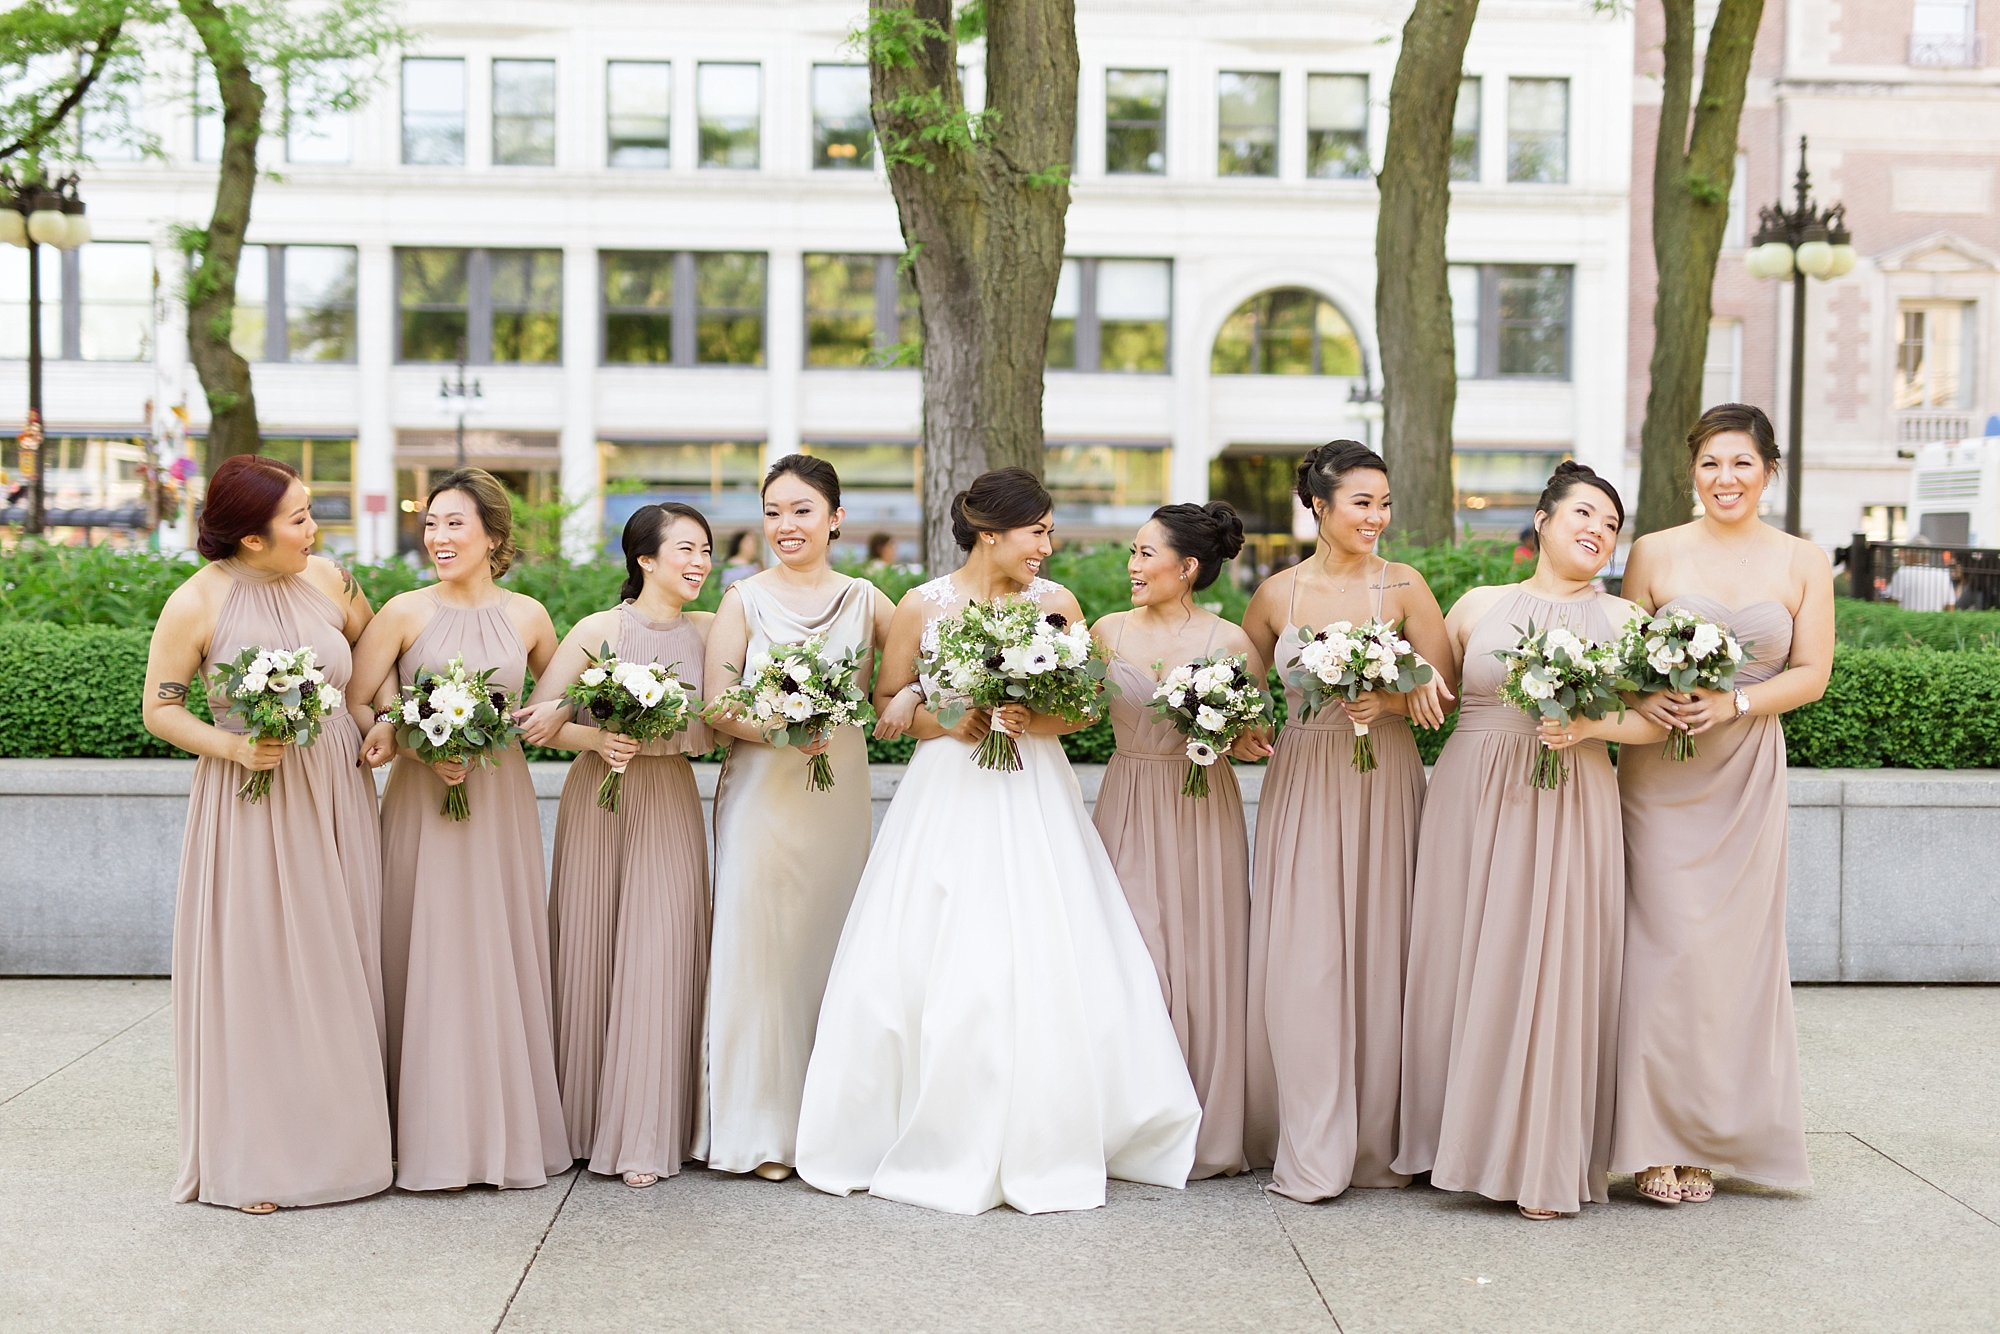 An elegant black tie spring city wedding filled with greenery and gold in Downtown Chicago by Breanne Rochelle Photography